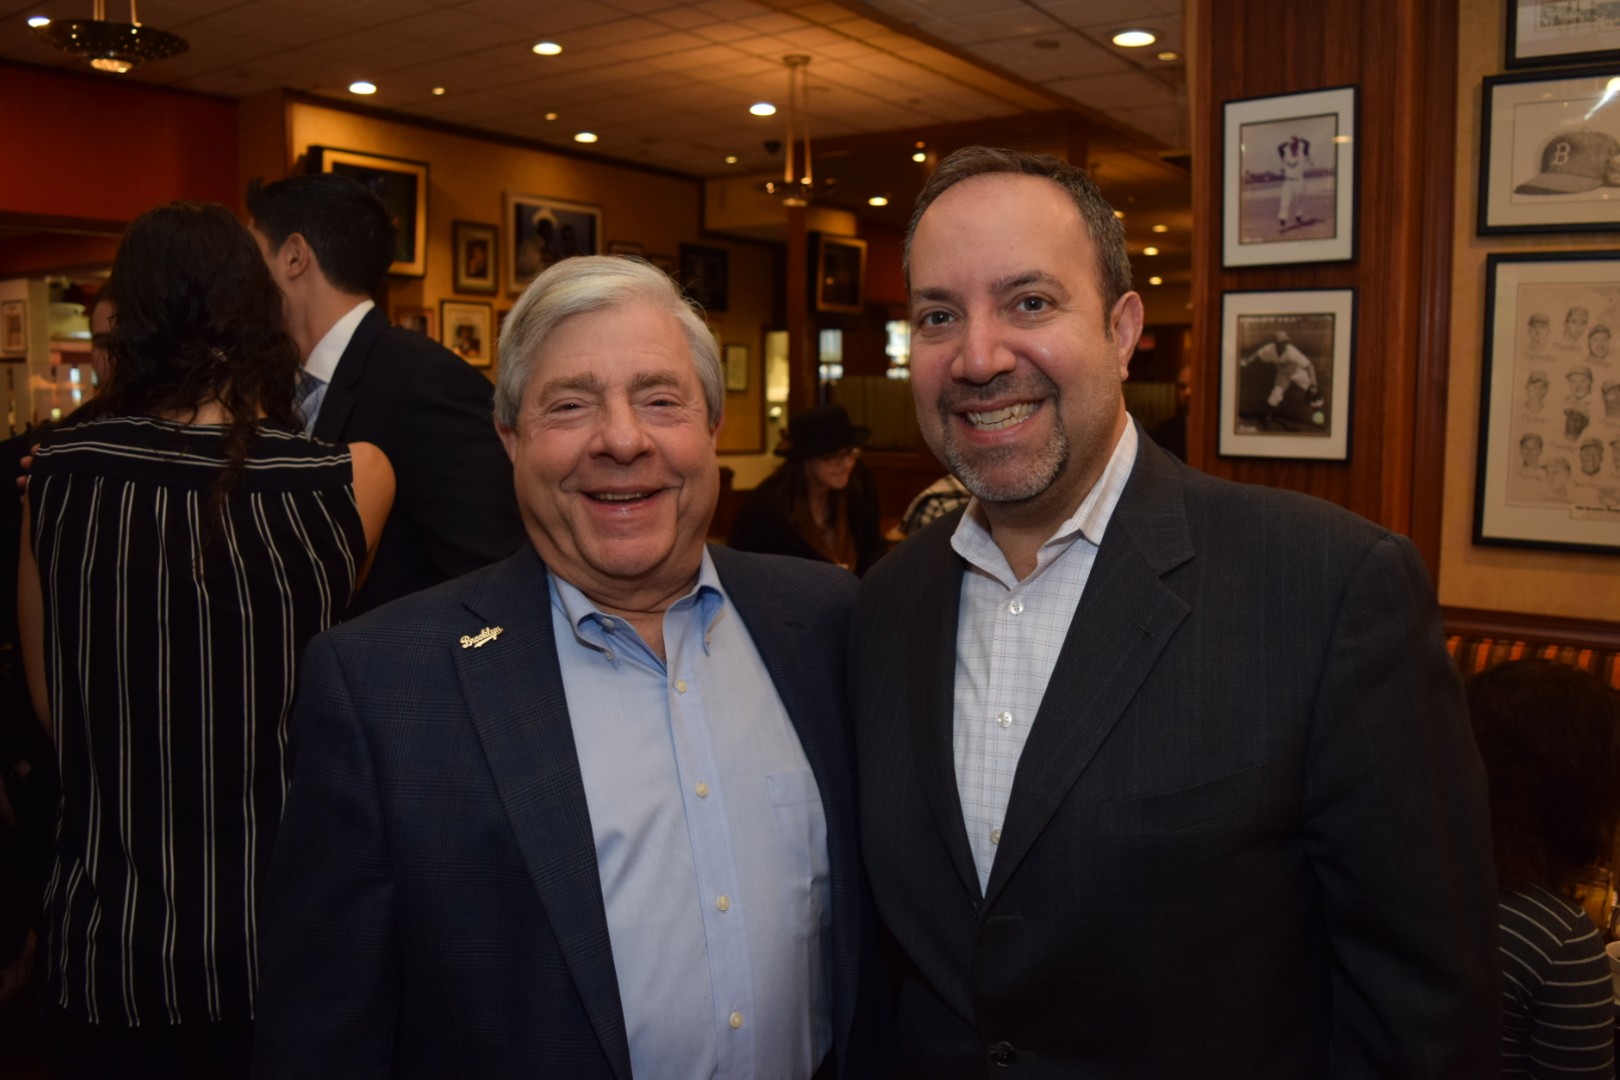 Former Brooklyn Borough President Marty Markowitz and Brooklyn Chamber of Commerce President Carlo Scissura.  Eagle photo by Rob Abruzzese